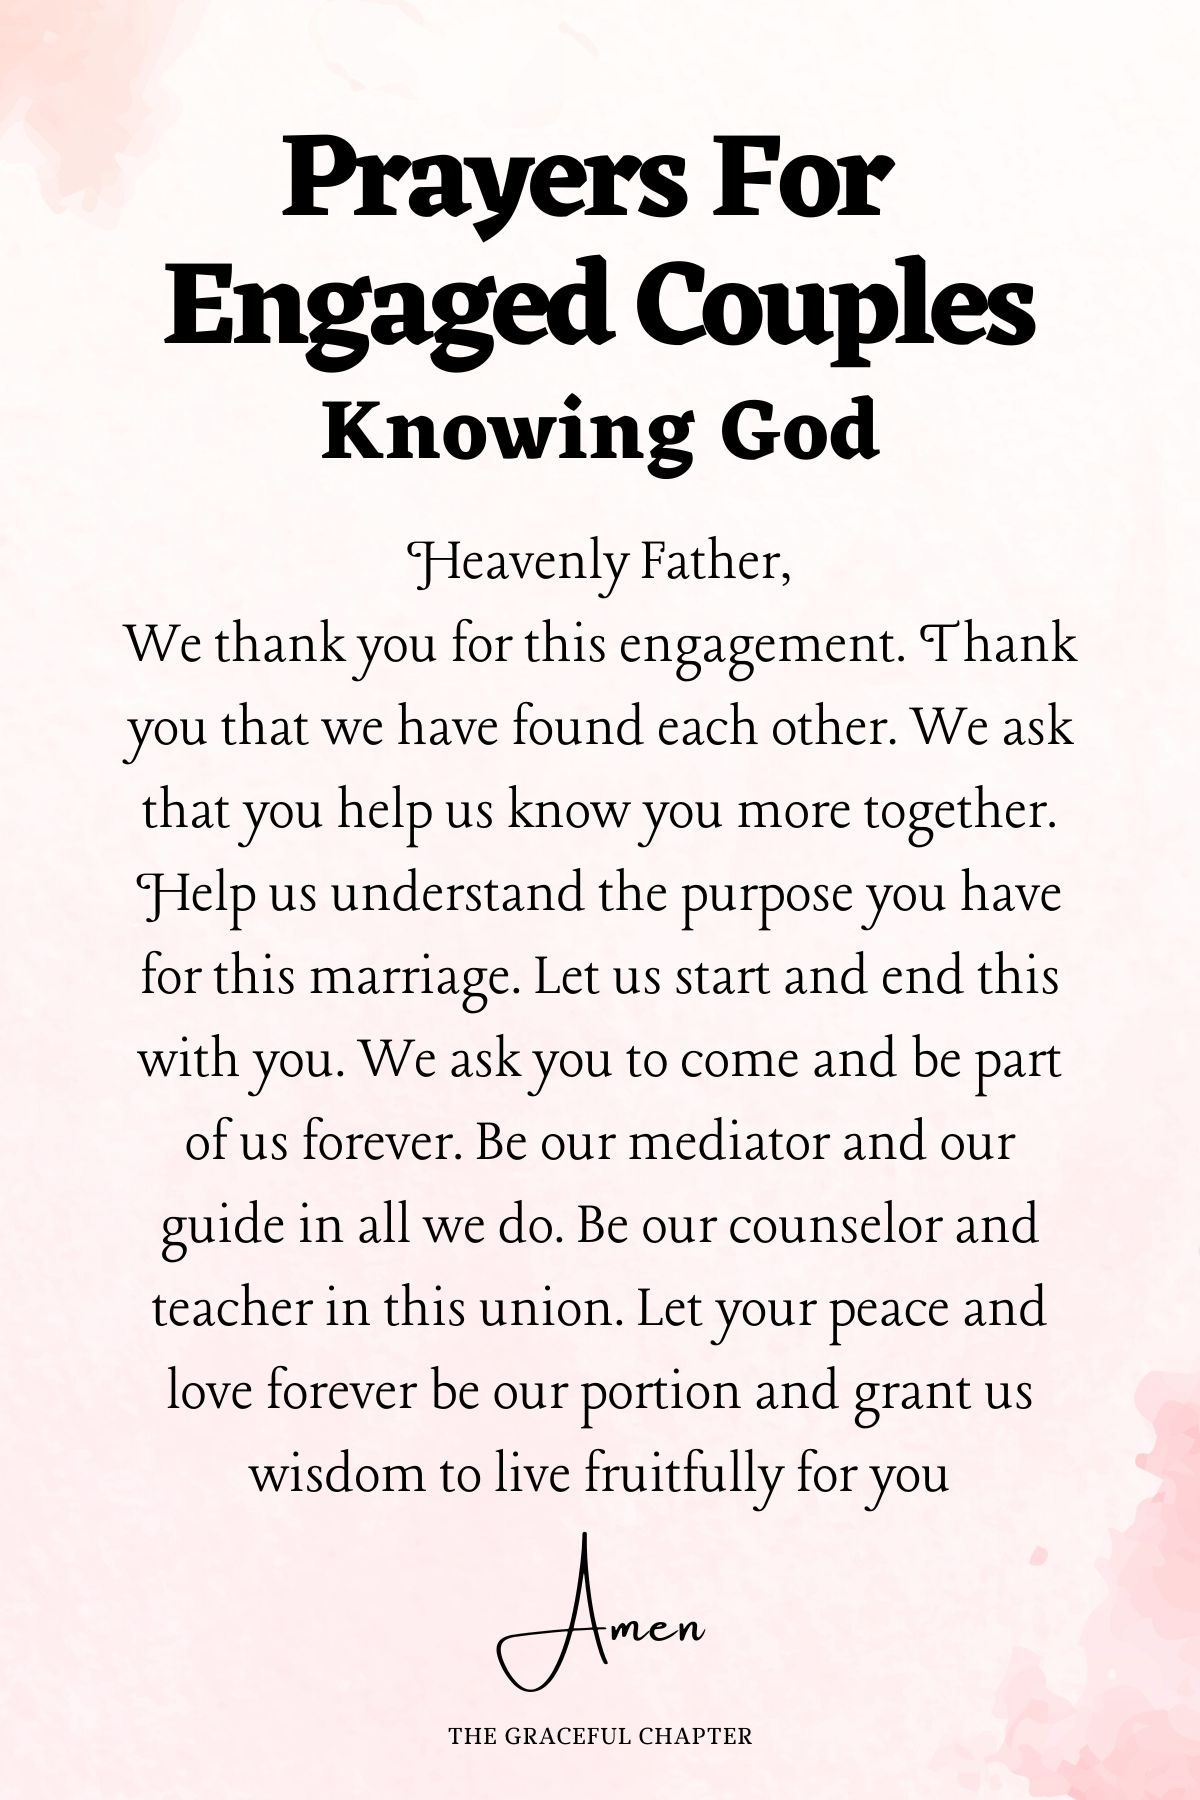 Prayer for engaged couples
Knowing God